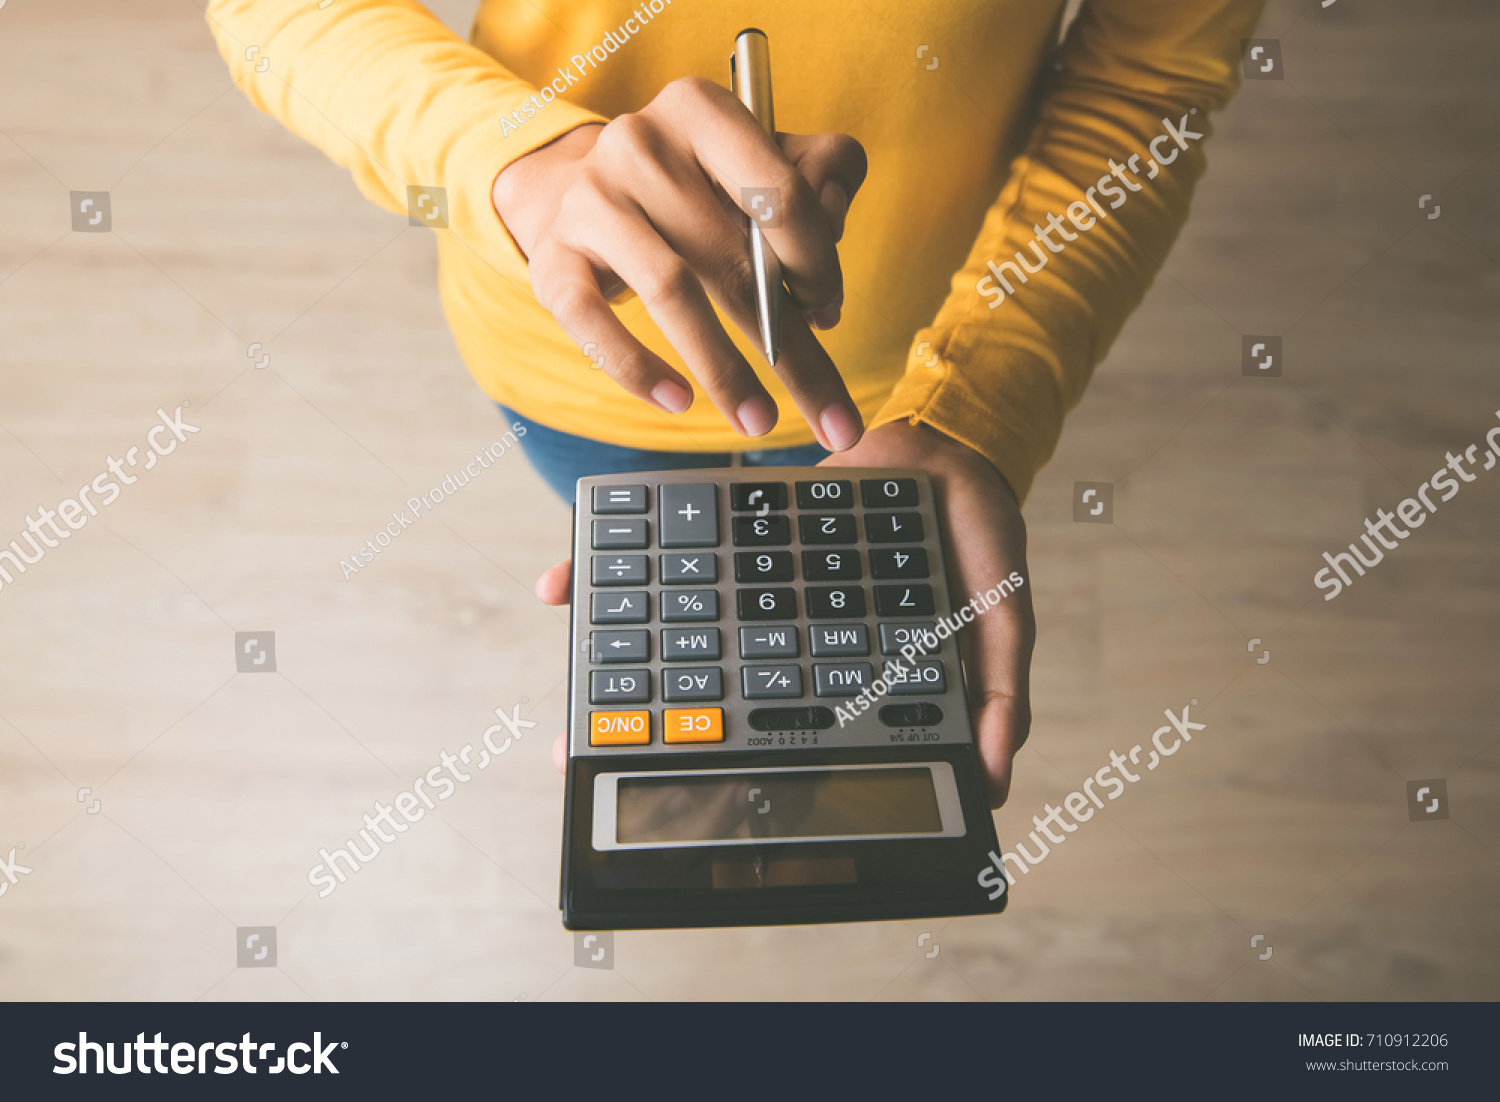 Woman entrepreneur using a calculator with a pen in her hand, calculating financial expense at home office #710912206